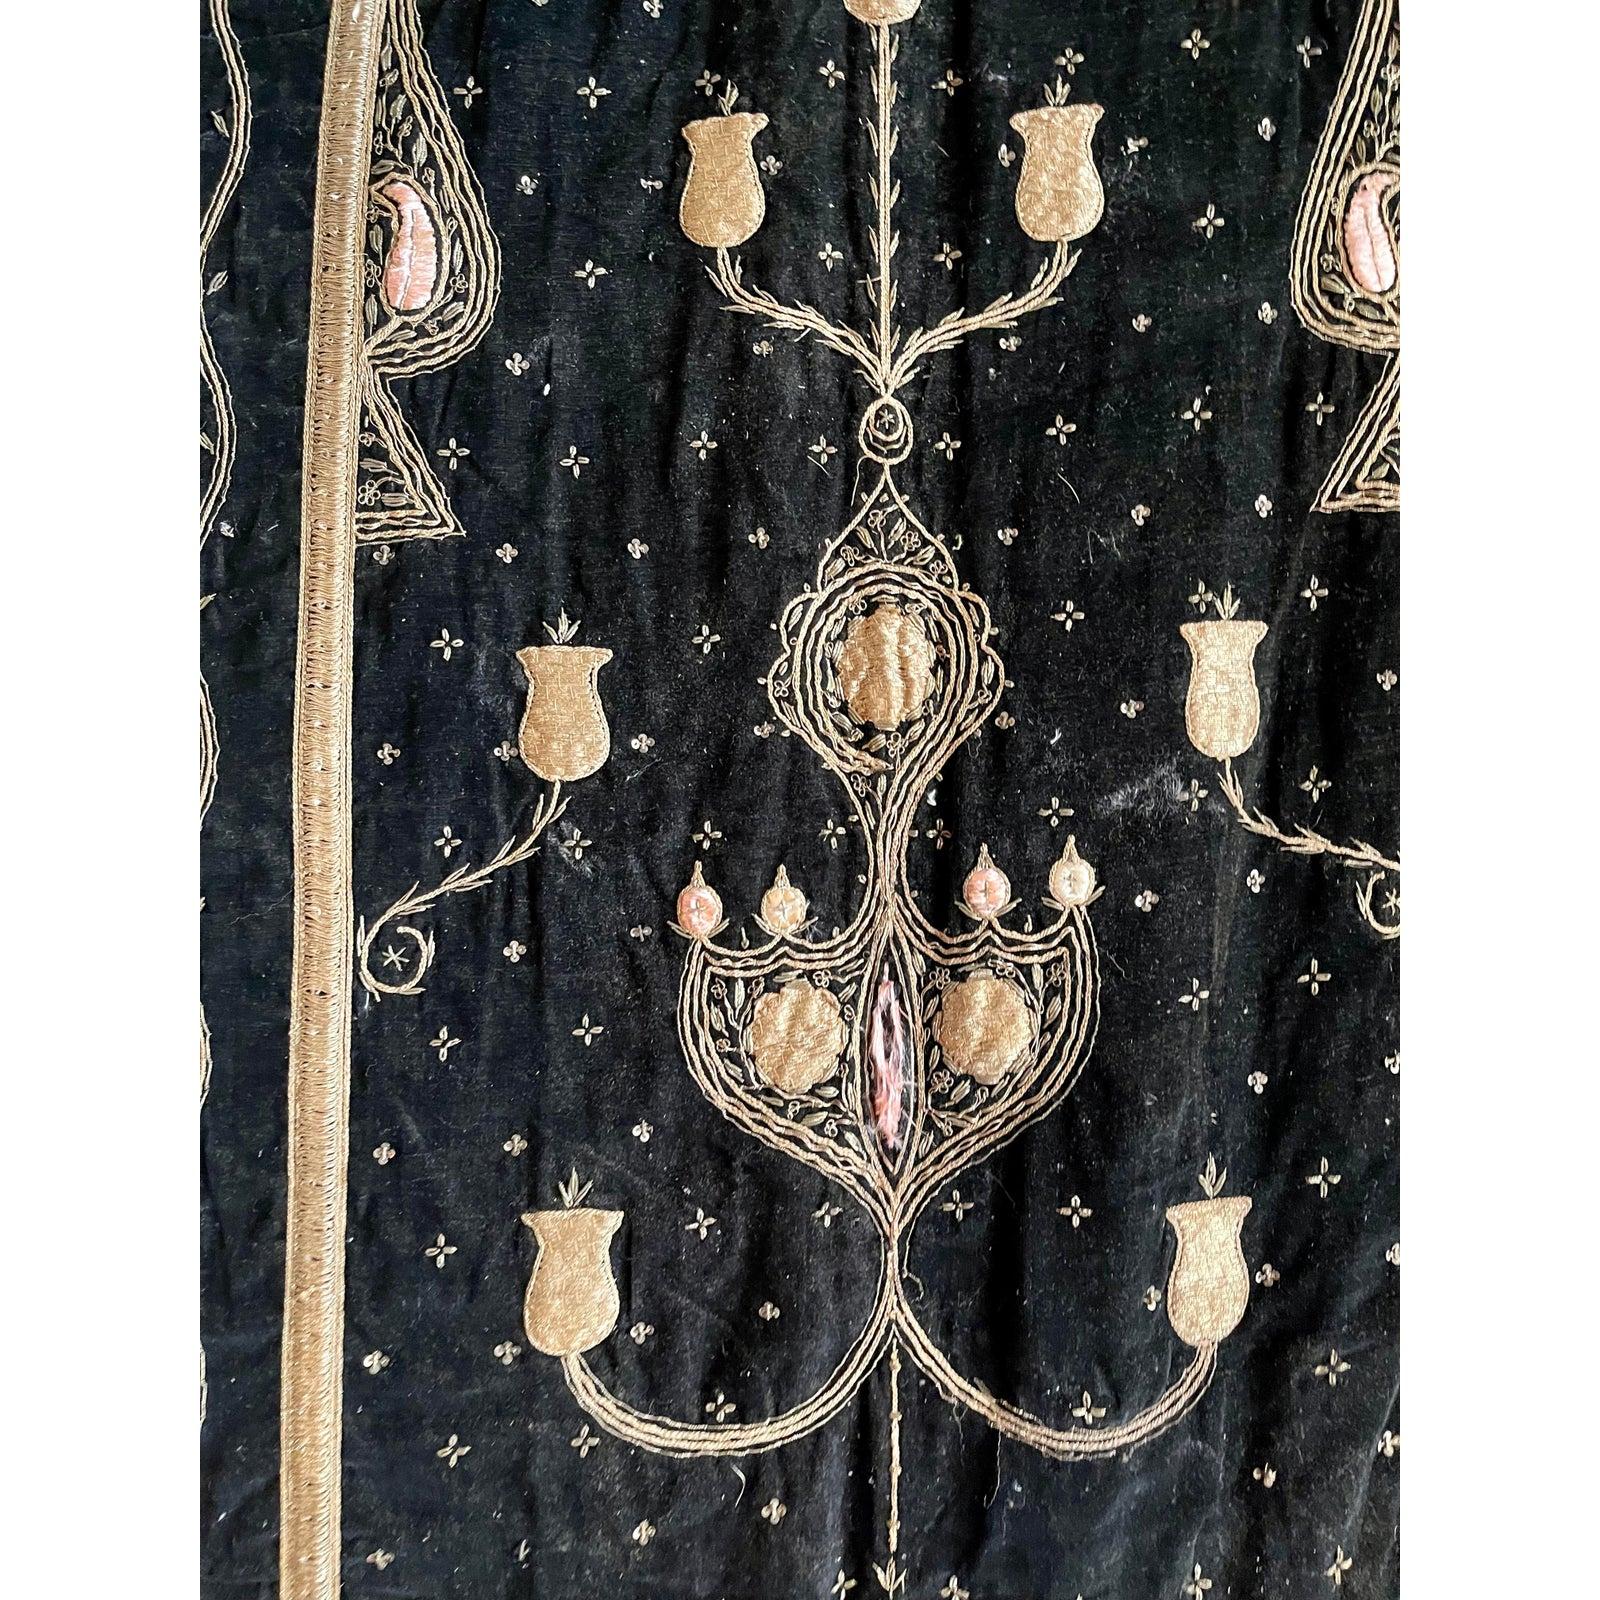 Antique Moroccan Textile Black & Gold Tapestry Rug, 19th Century For Sale 1